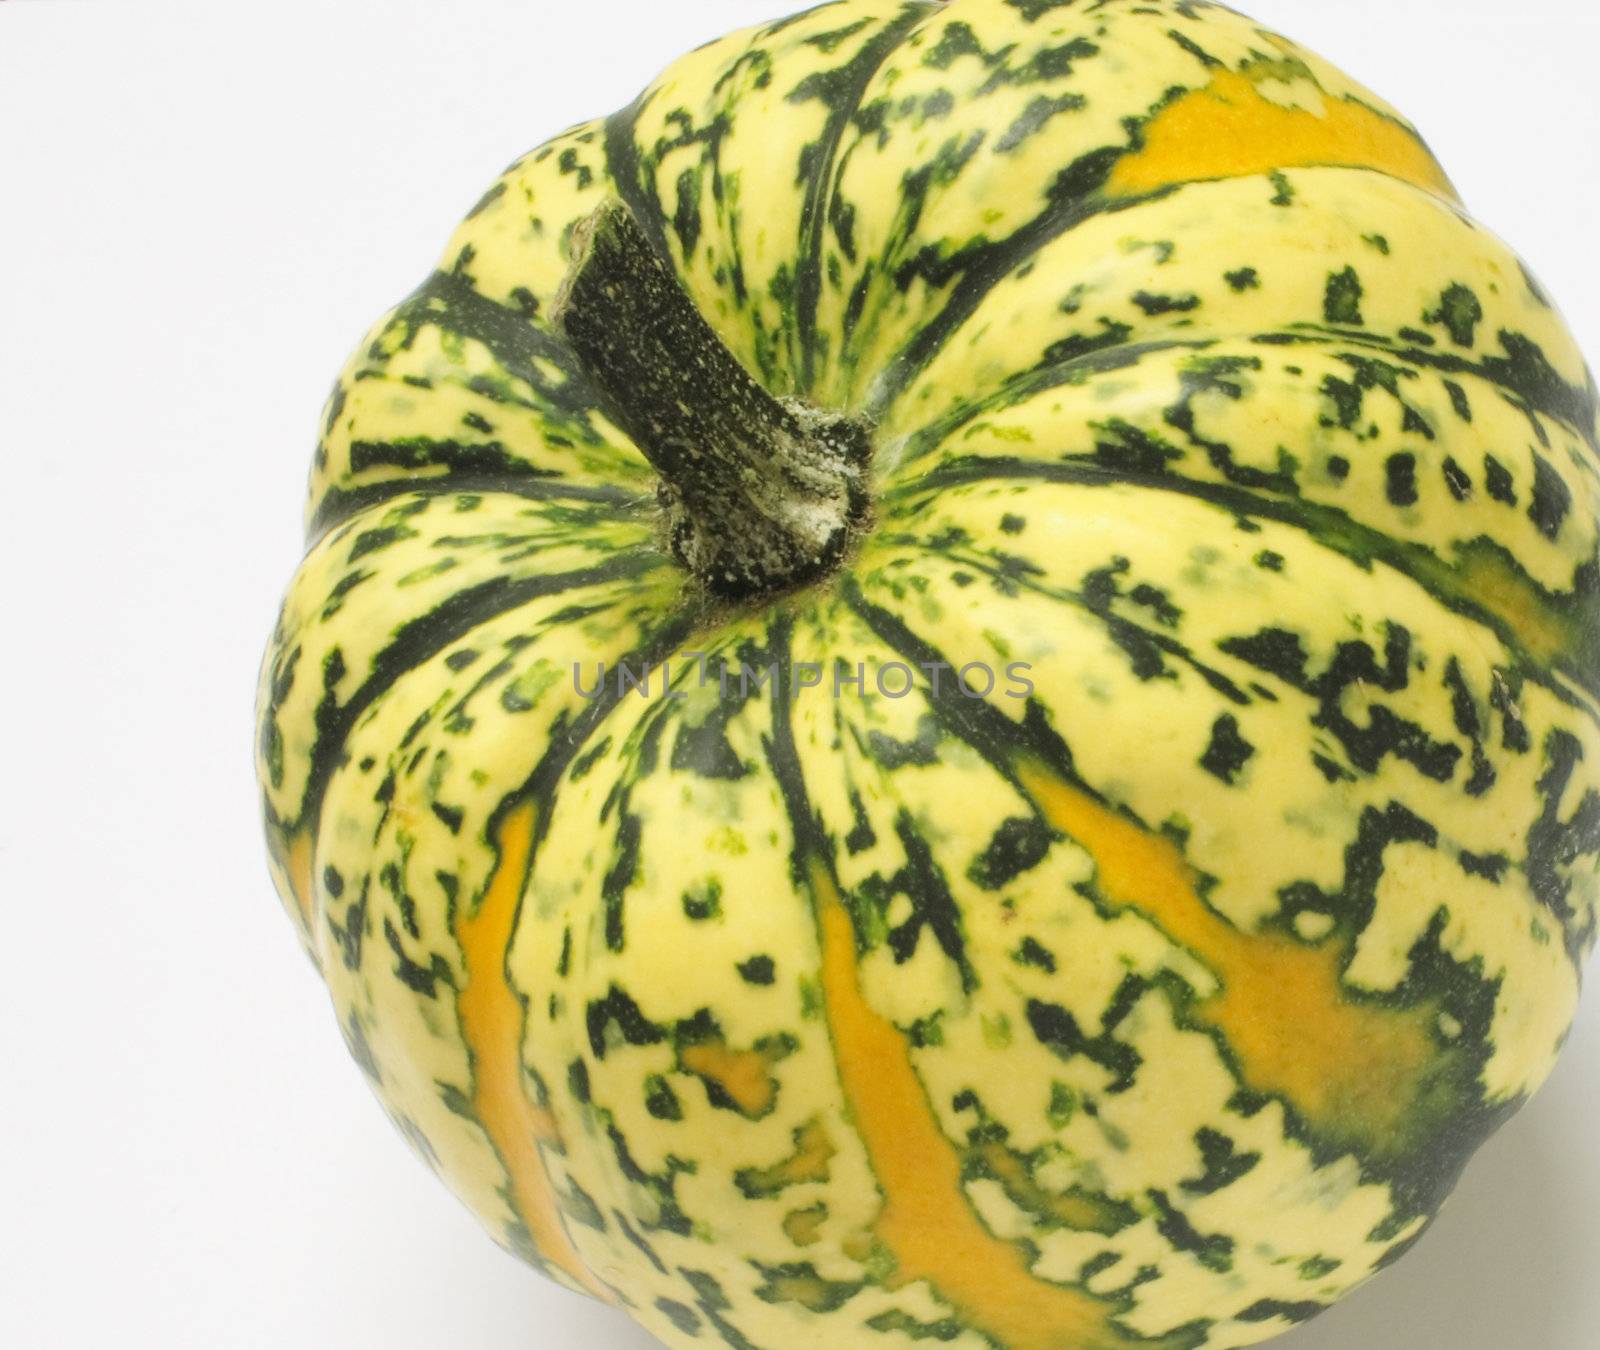 green and yellow ornamental squash isolated over alight background